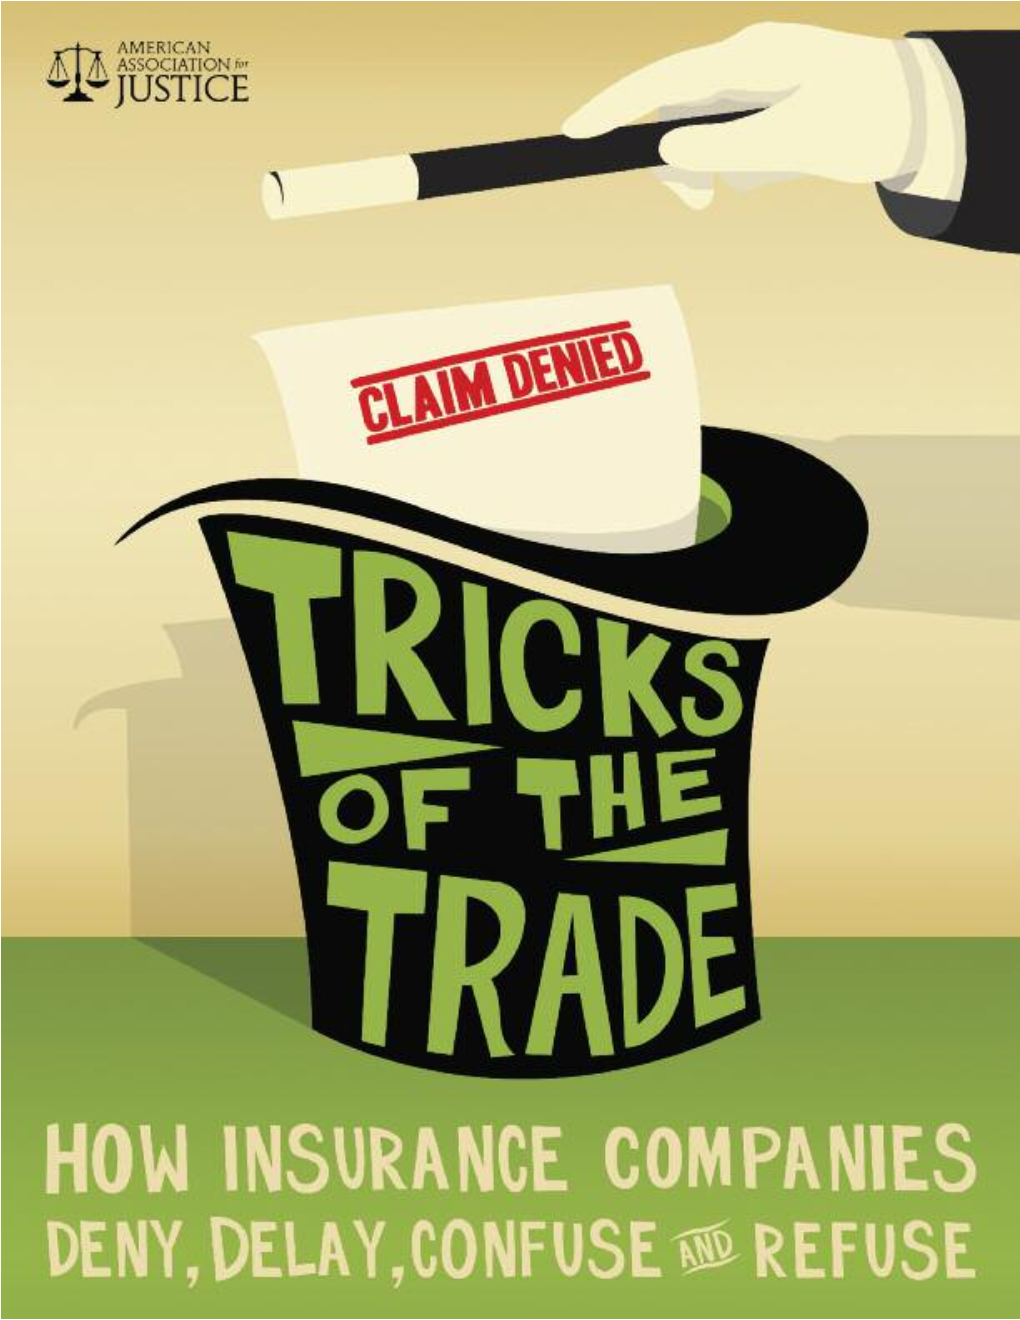 Tricks of the Trade: How Insurance Companies Deny, Delay, Confuse and Refuse